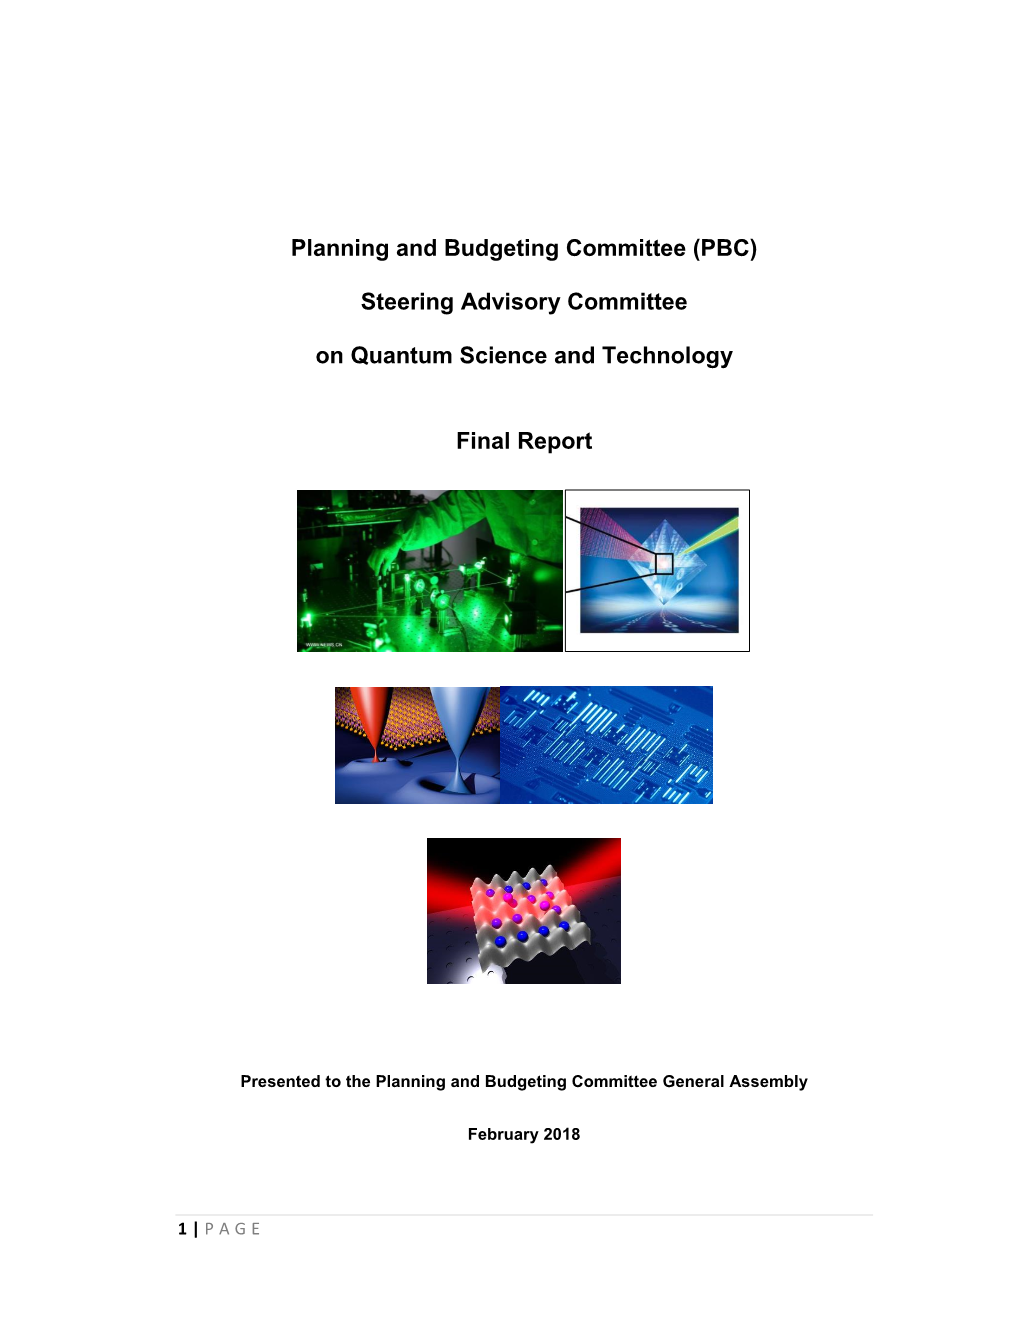 (PBC) Steering Advisory Committee on Quantum Science And